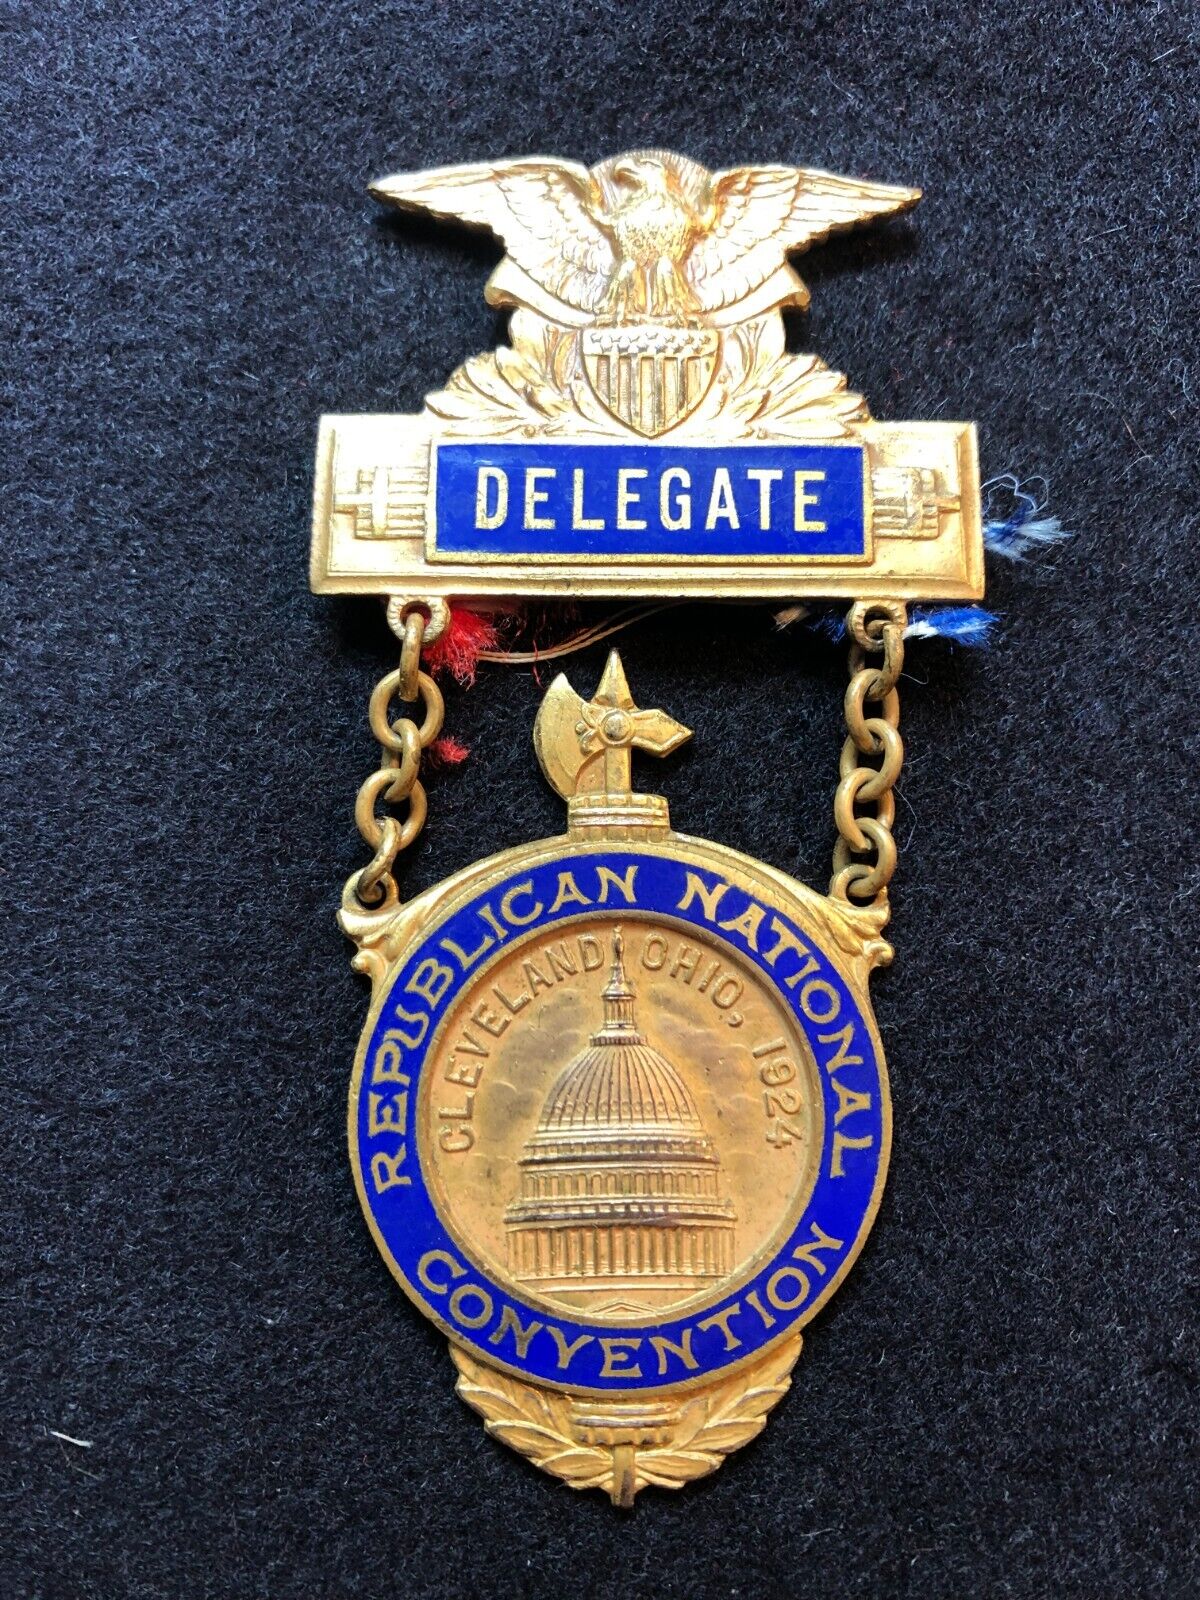 1924 Republican National Convention Cleveland, Ohio, Delegate Medal